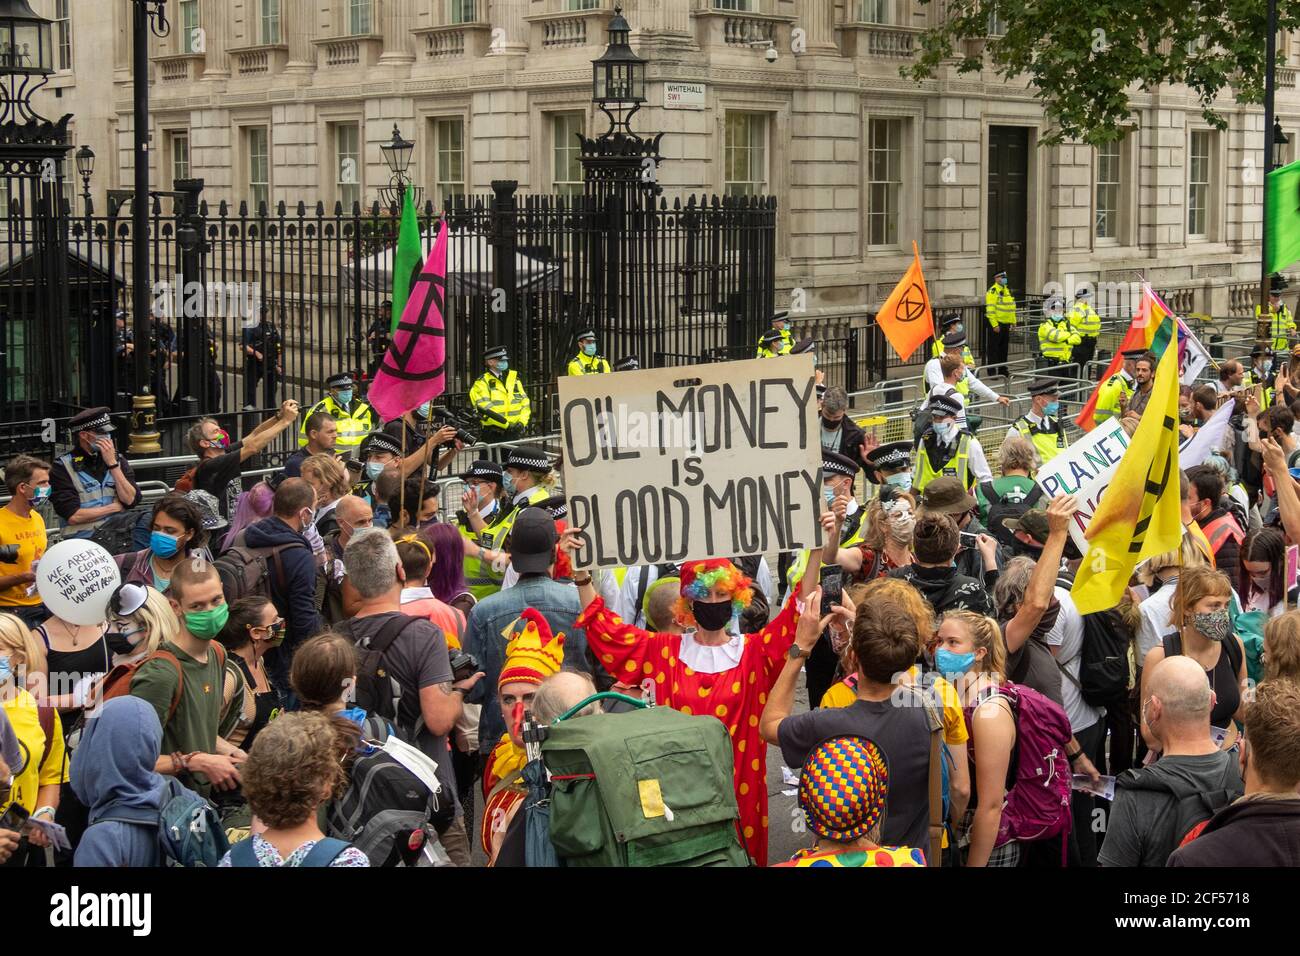 London- September, 2020: Extinction Rebellion protests in central London campaigning on climate change issues Stock Photo